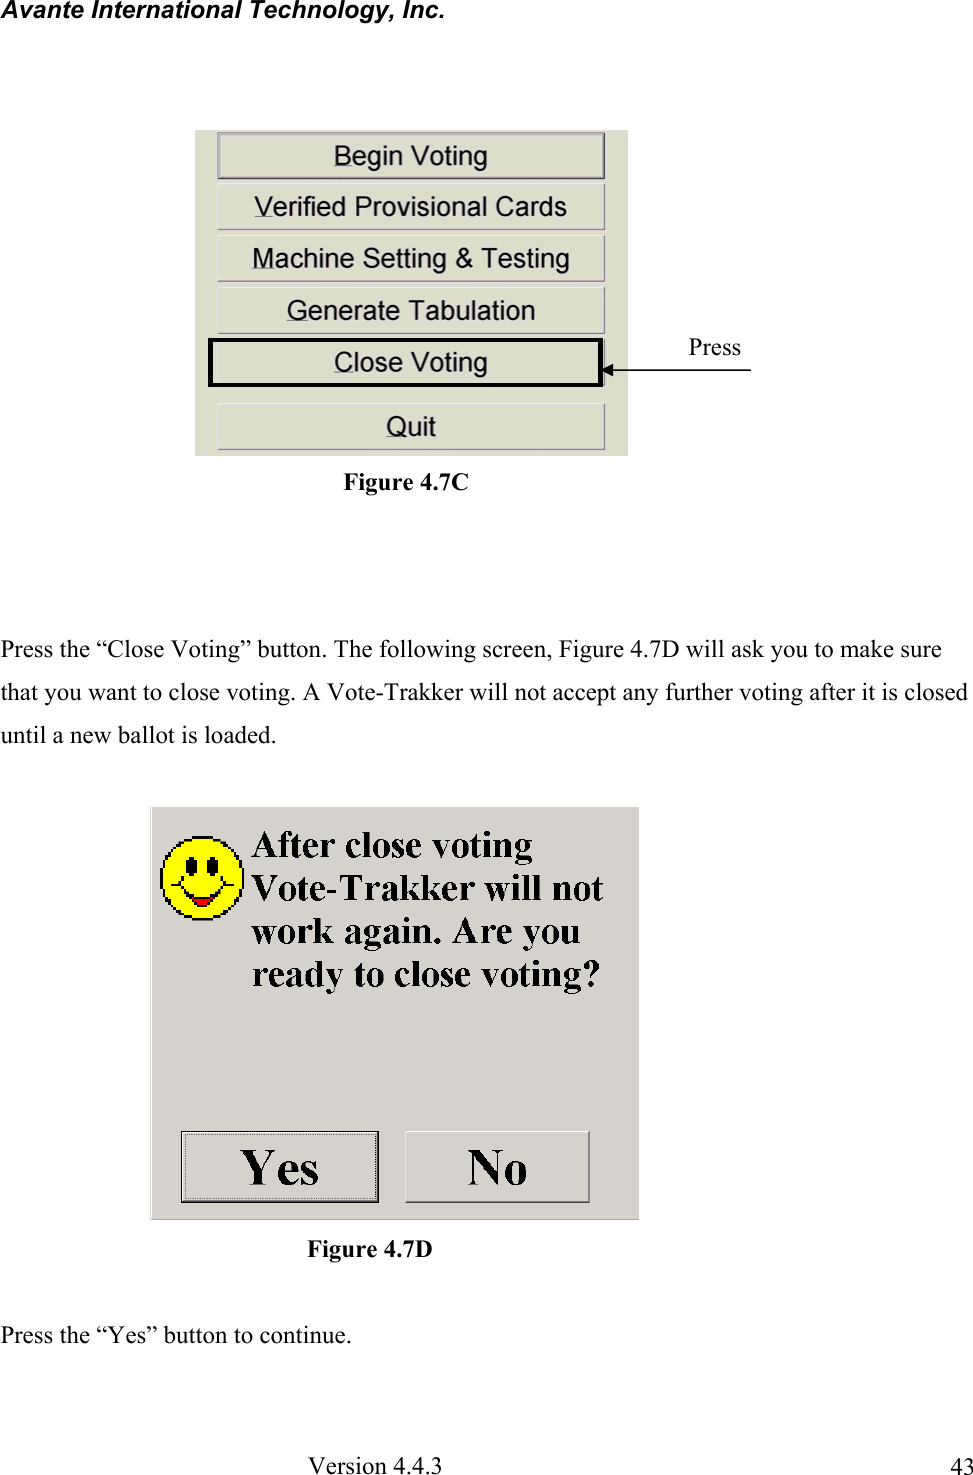 Avante International Technology, Inc.  Version 4.4.3  43                                                     Press the “Close Voting” button. The following screen, Figure 4.7D will ask you to make sure that you want to close voting. A Vote-Trakker will not accept any further voting after it is closed until a new ballot is loaded.                                                    Figure 4.7D  Press the “Yes” button to continue. Press   Figure 4.7C 